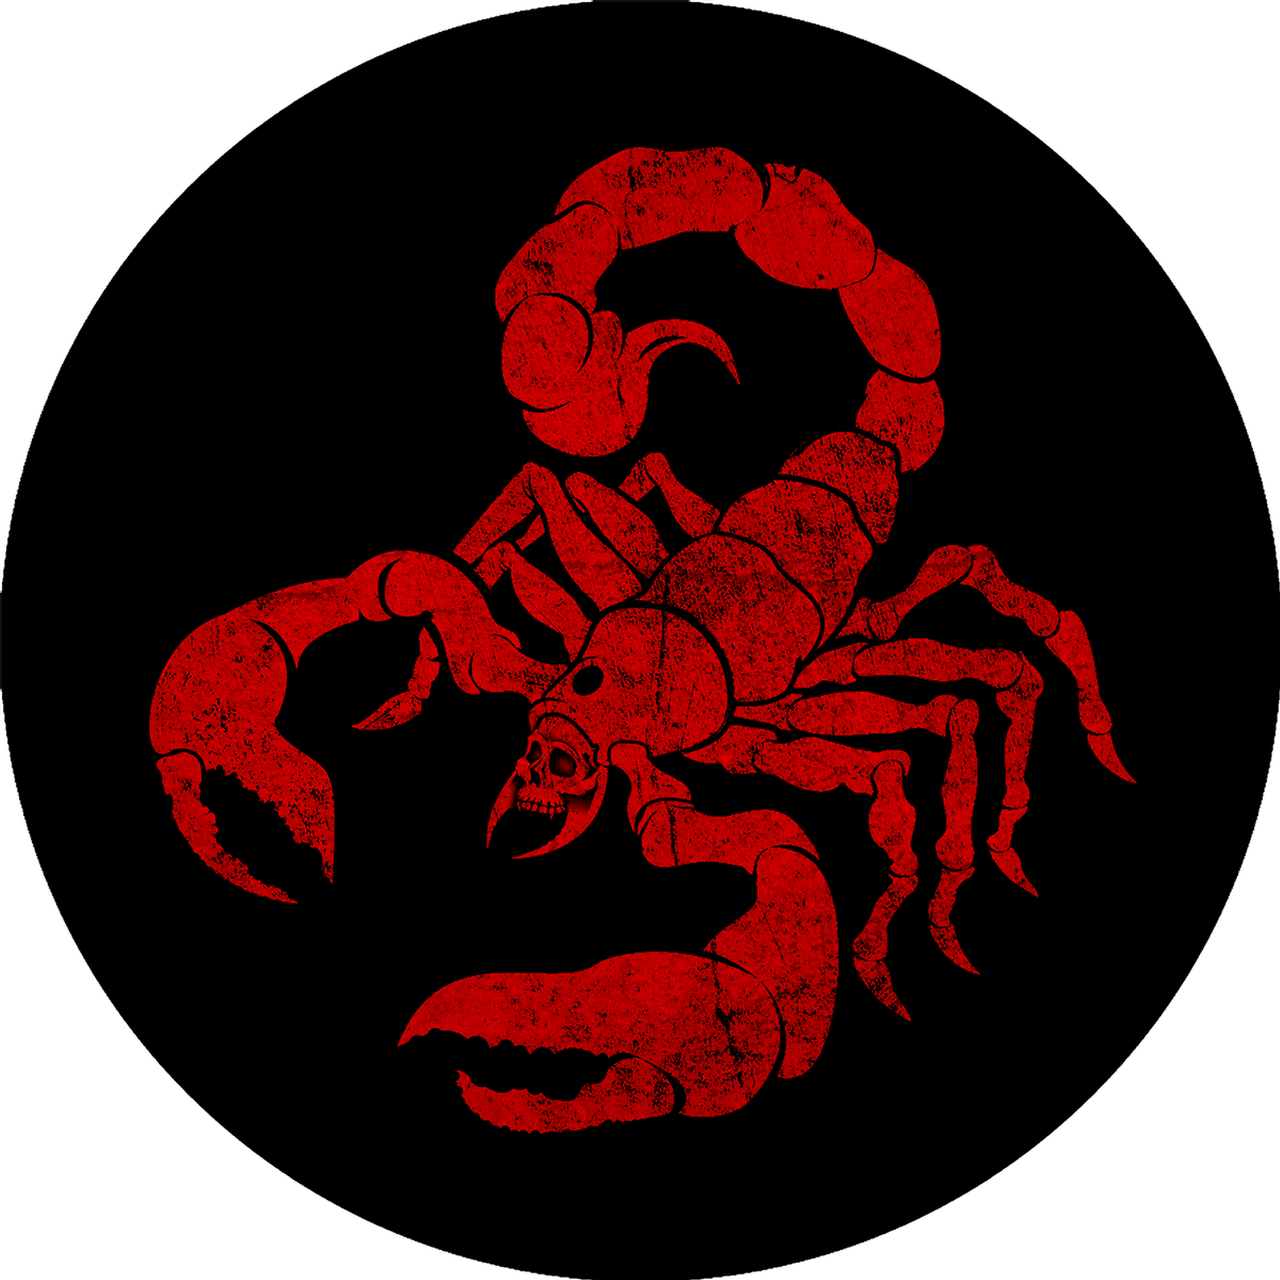 A Red Scorpion On A Black Background